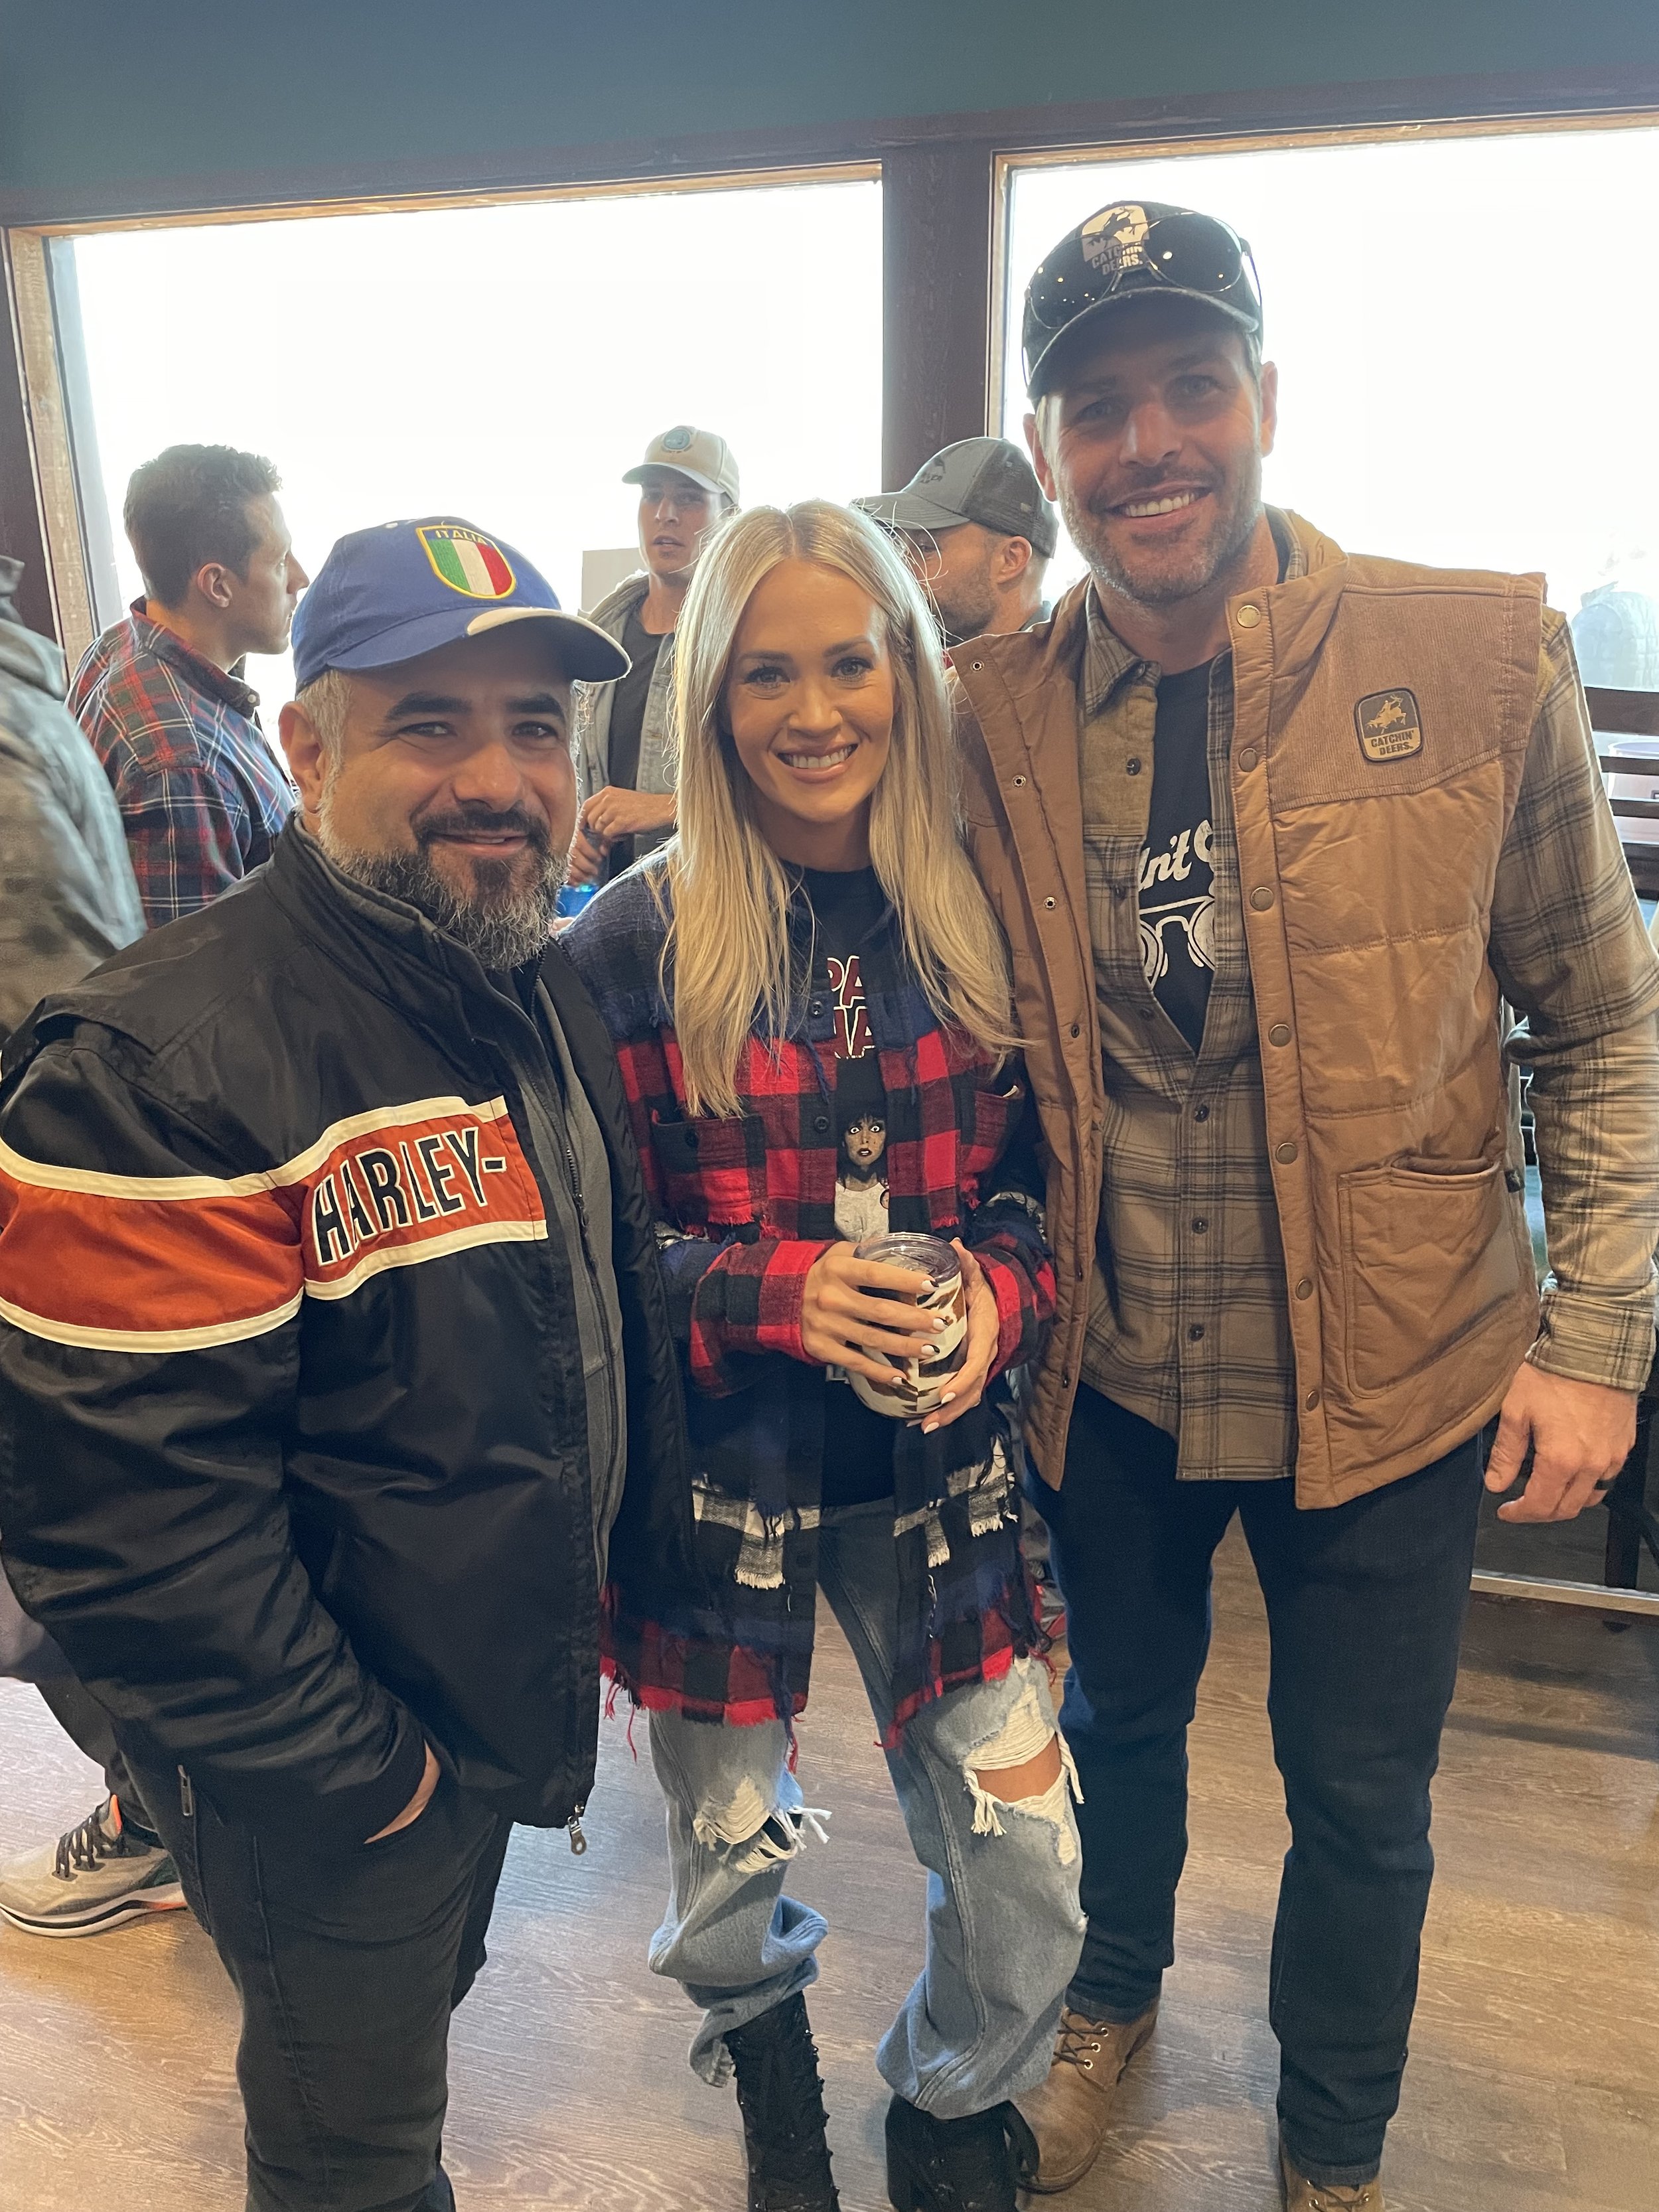 Carrie Underwood, Mike Fisher, &amp; JCF